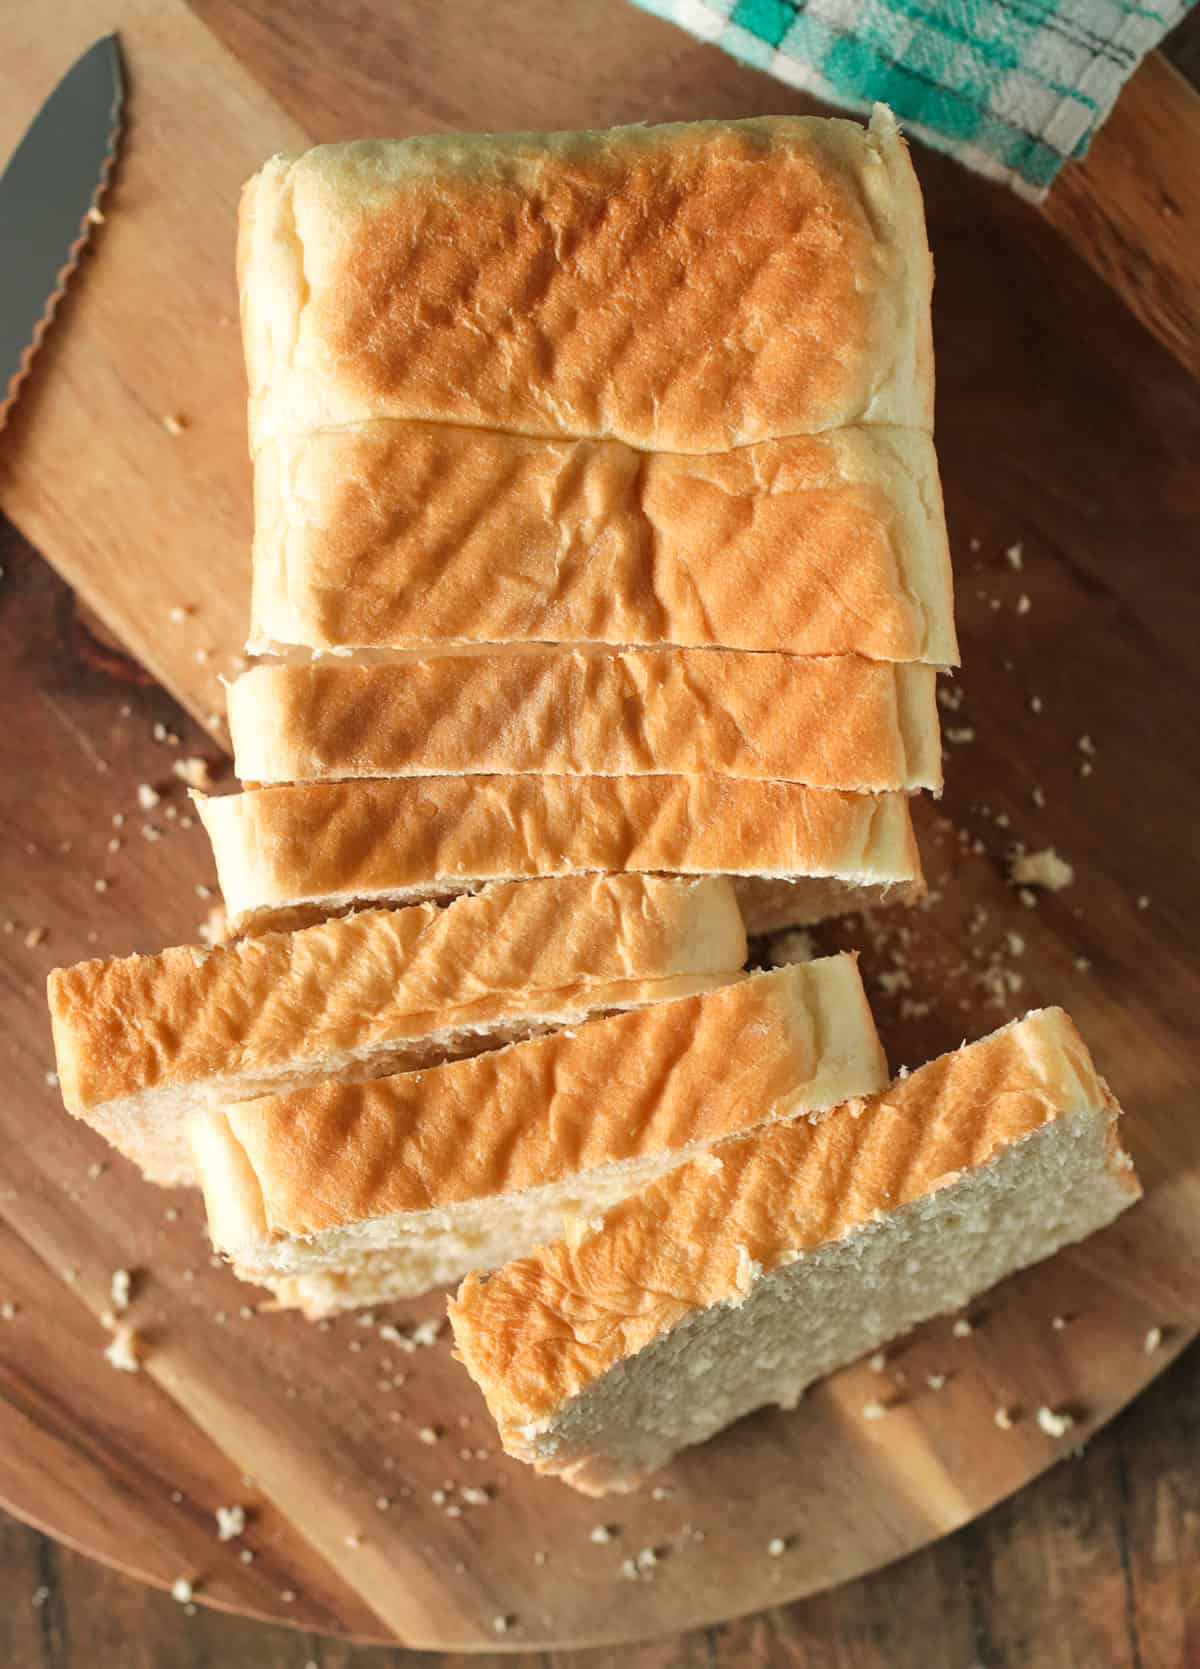 Top view of sliced tasty bread.